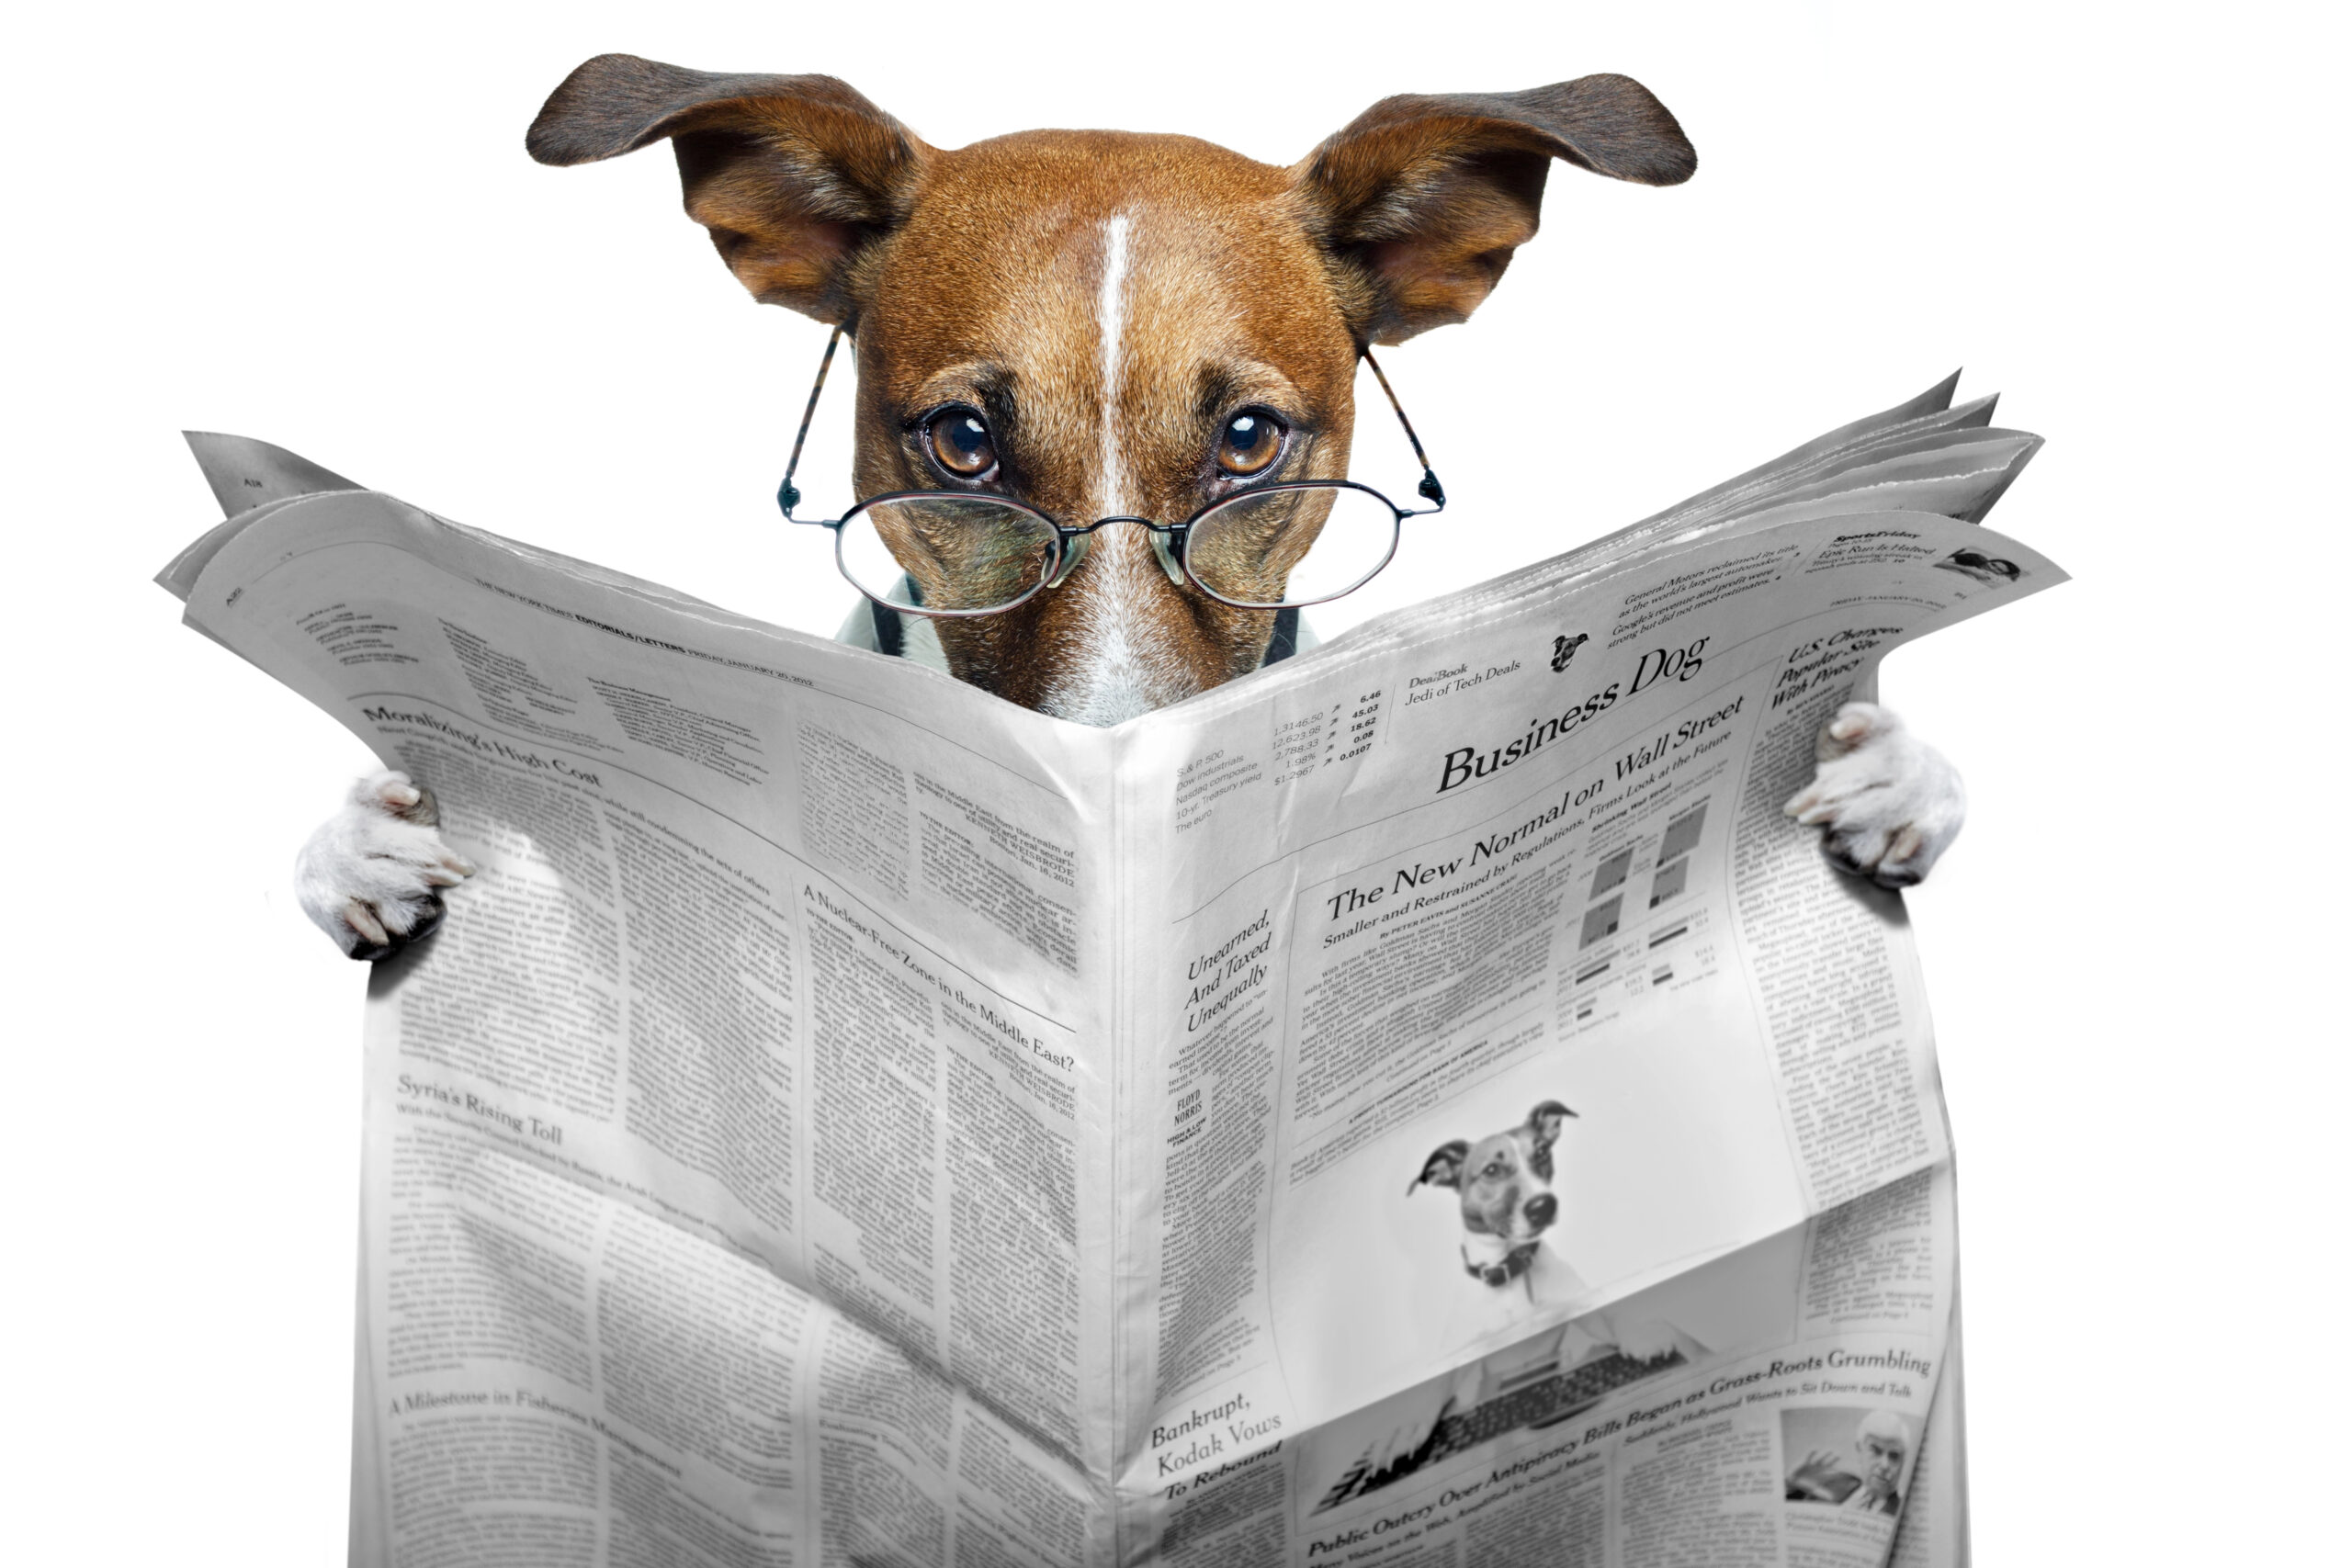 Smart Dog reading the news about creating a successful Cookbook Fundraiser